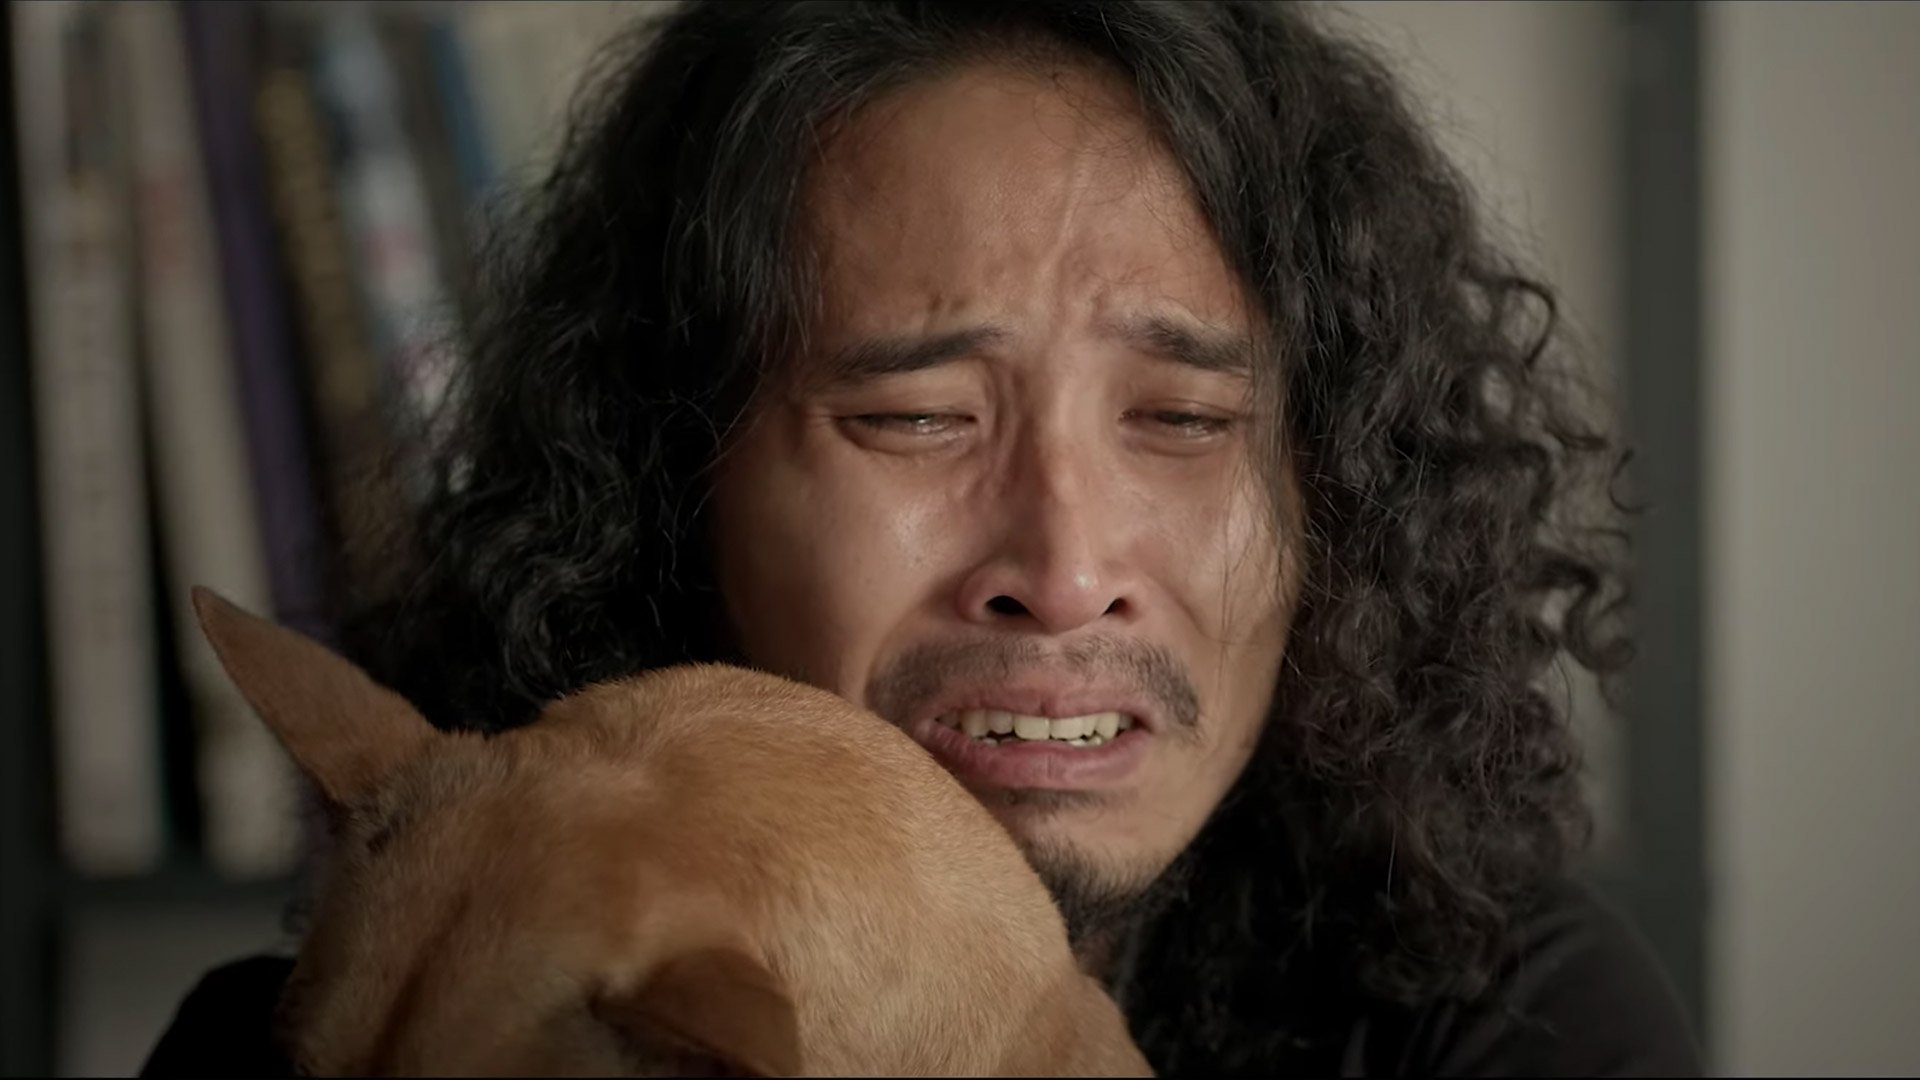 “It’s OK to Cry” - GIGIL’s film touches on the issue of mental health during the pandemic